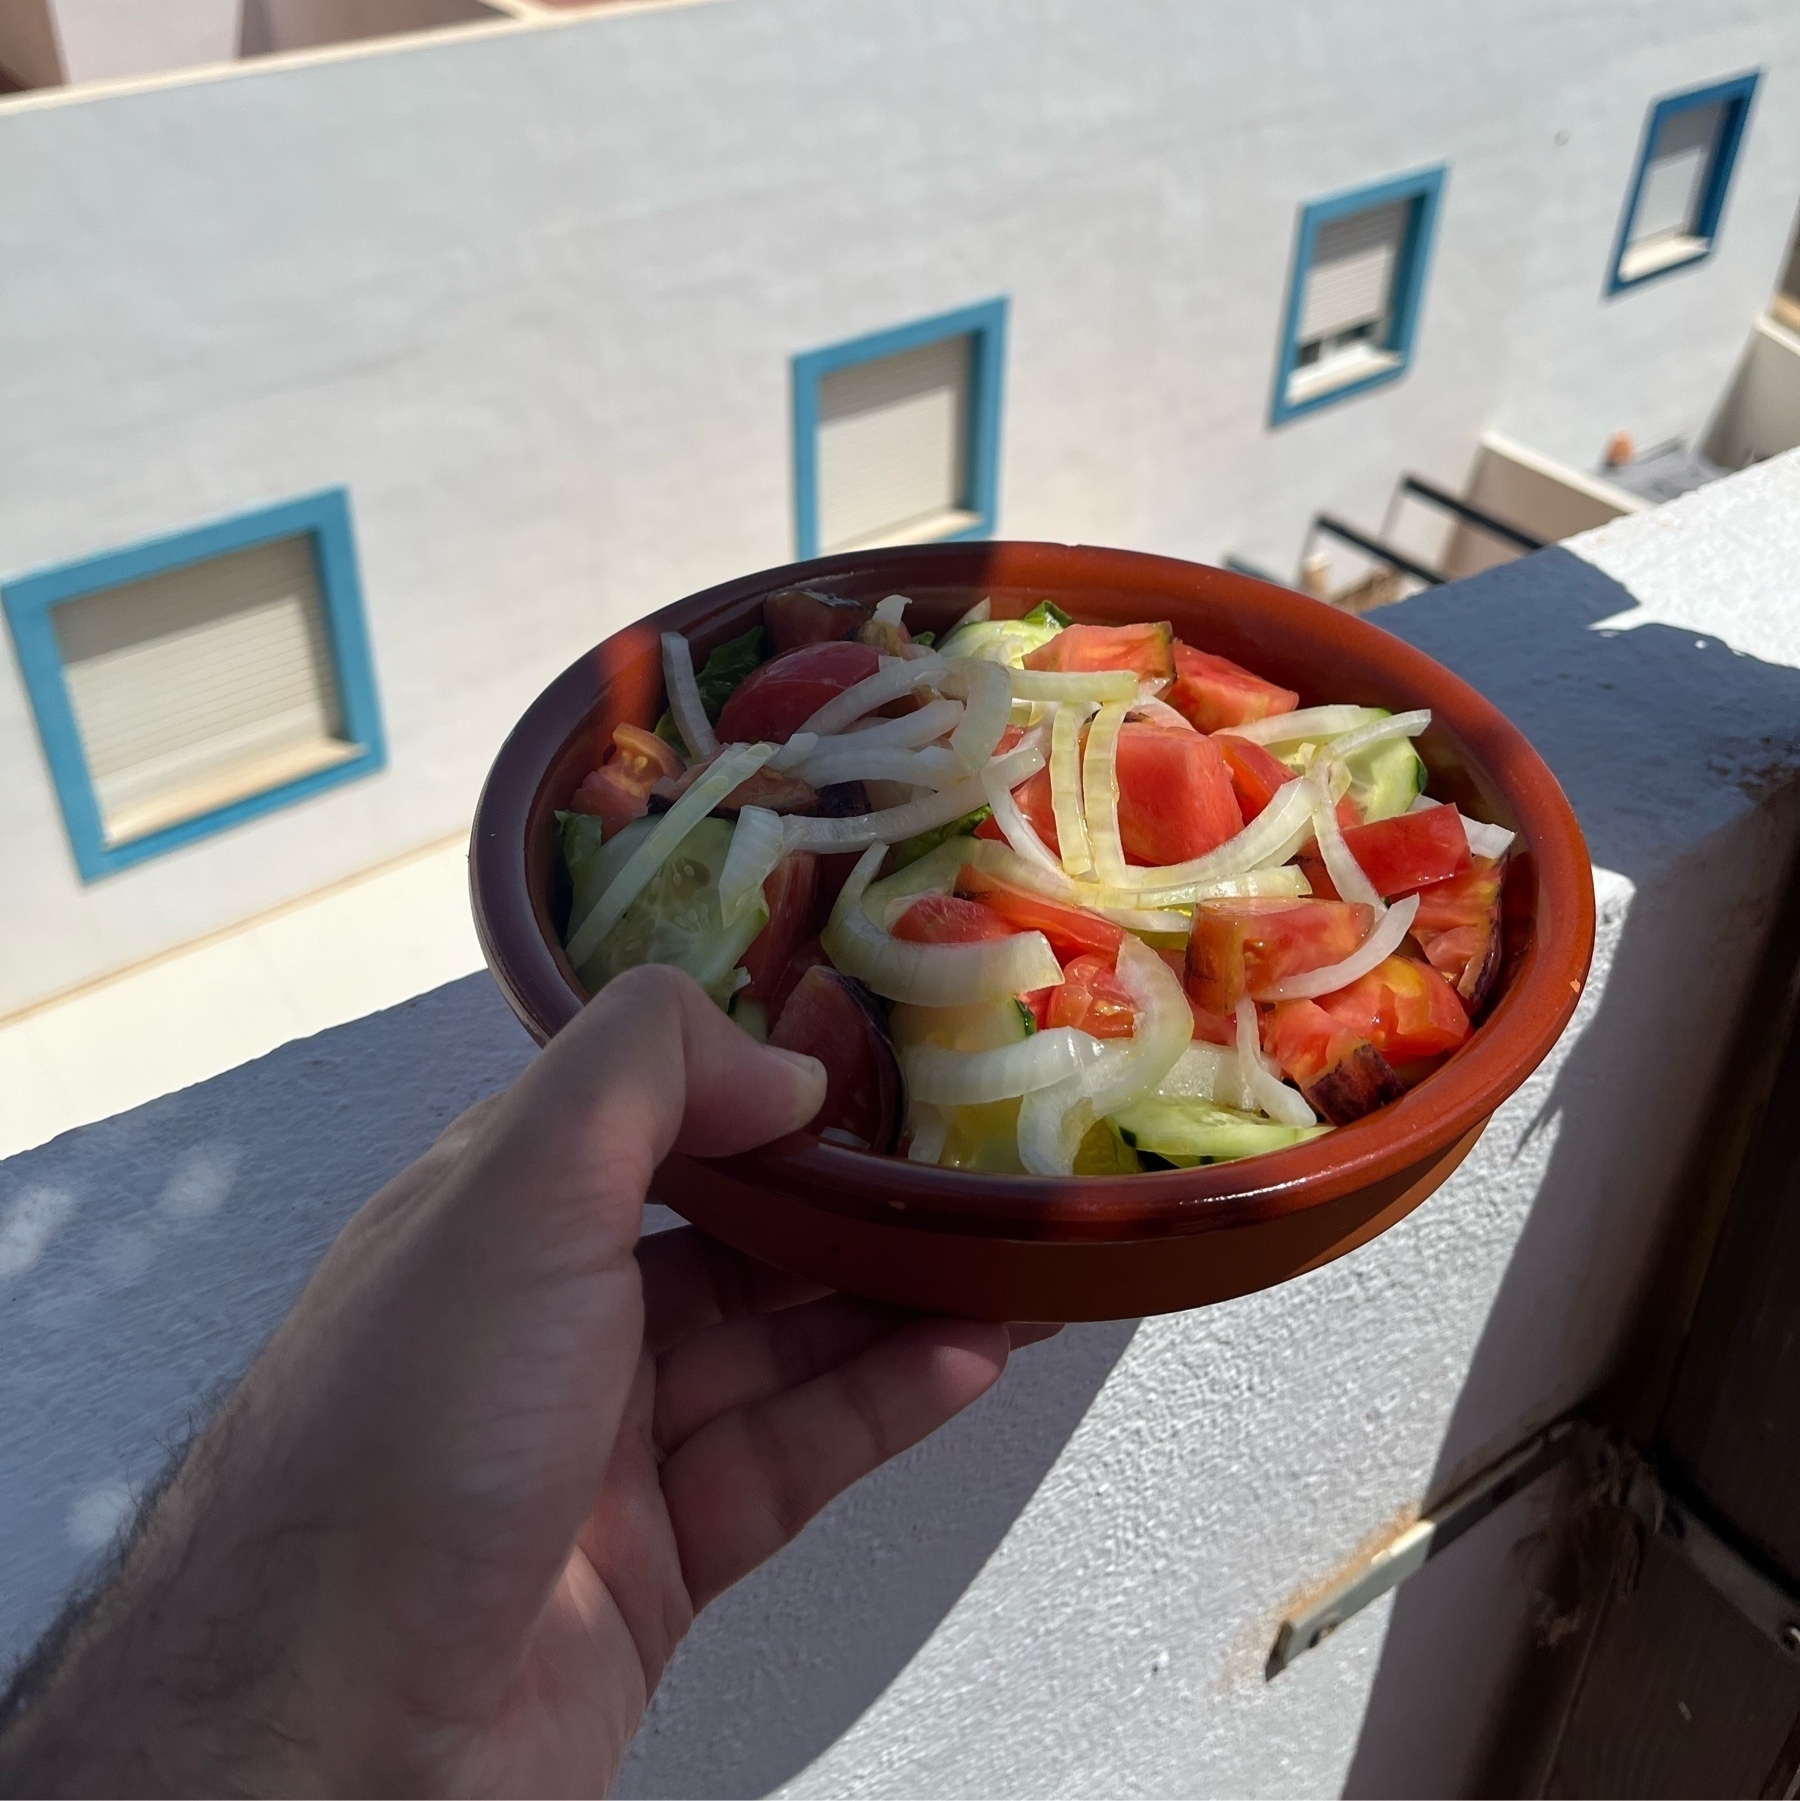 Salad with tomatoes and onions on a brown clay bowl.